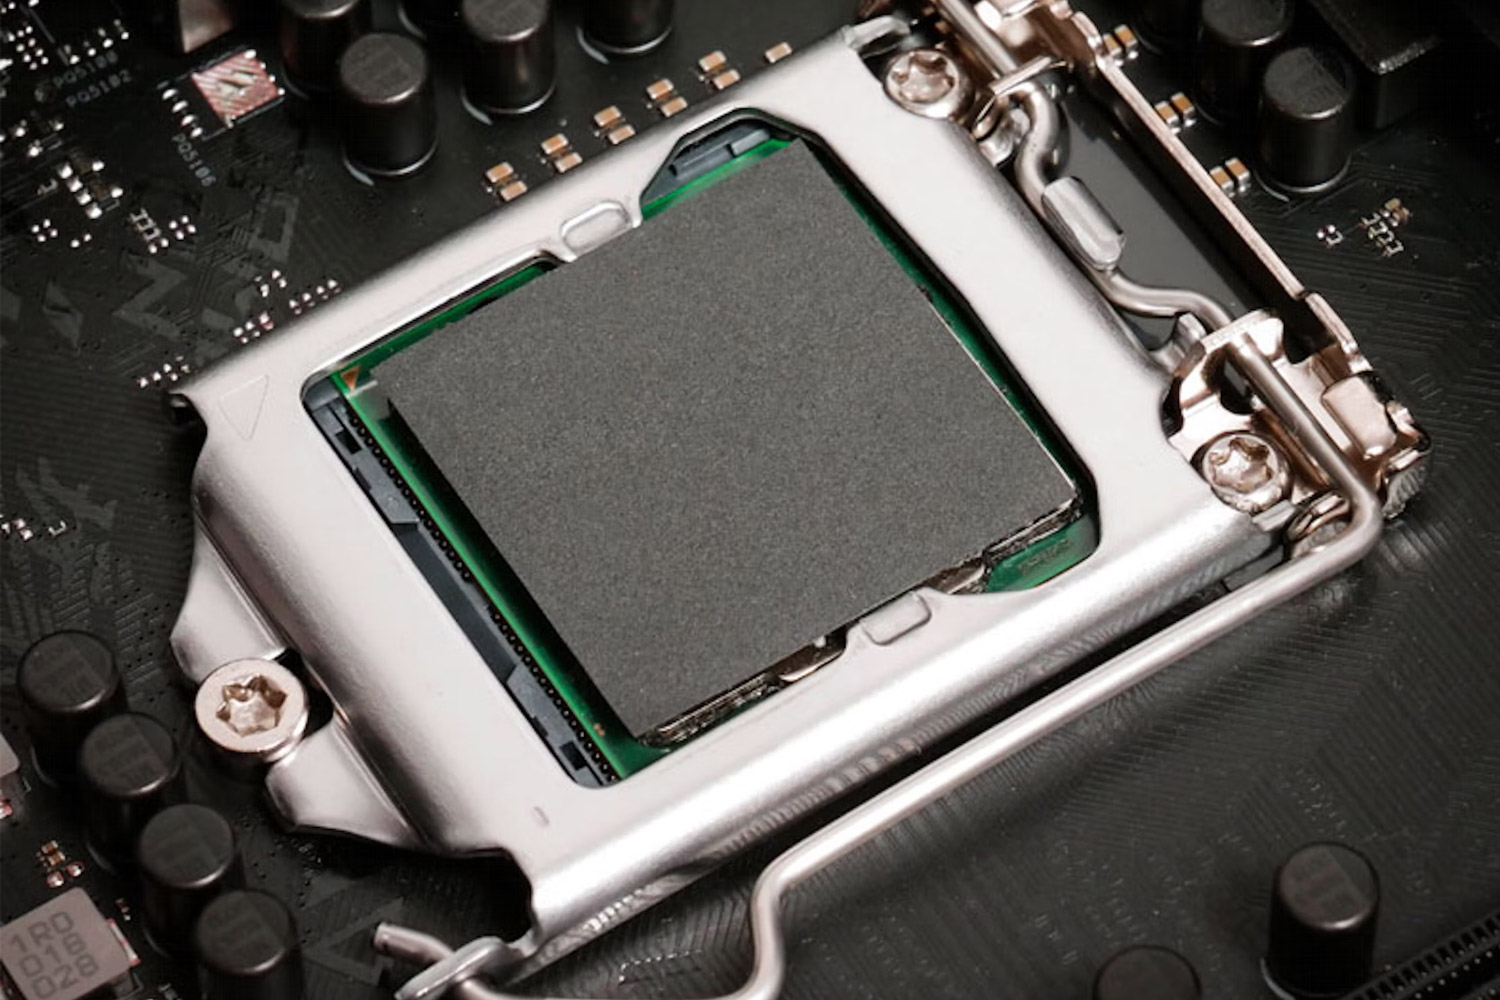 How to apply thermal paste